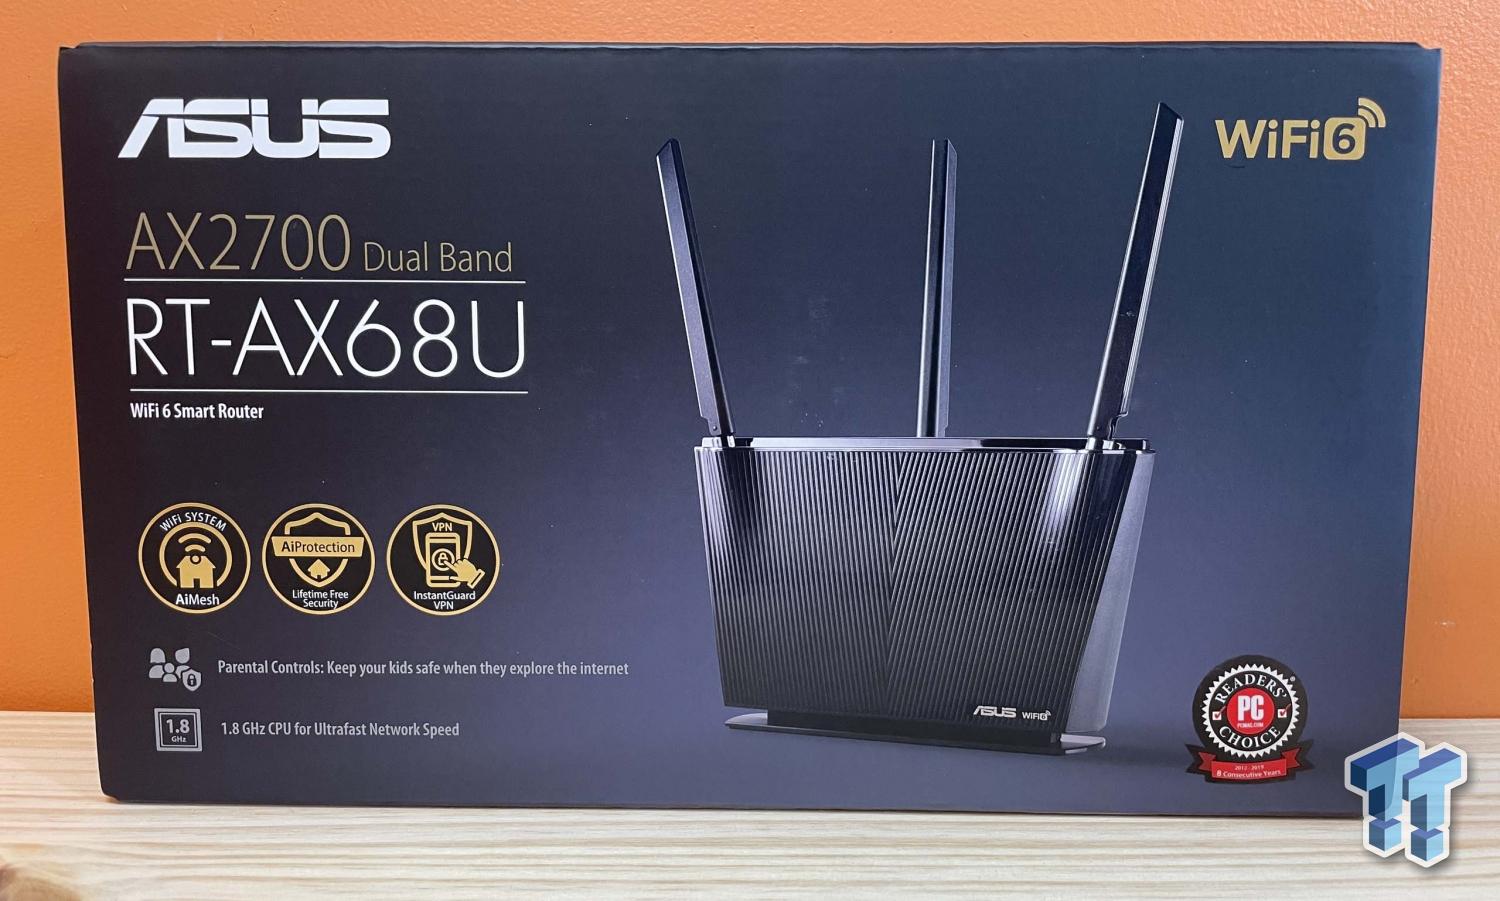 ASUS RT-AX68U Wi-Fi 6 Wireless Router Review